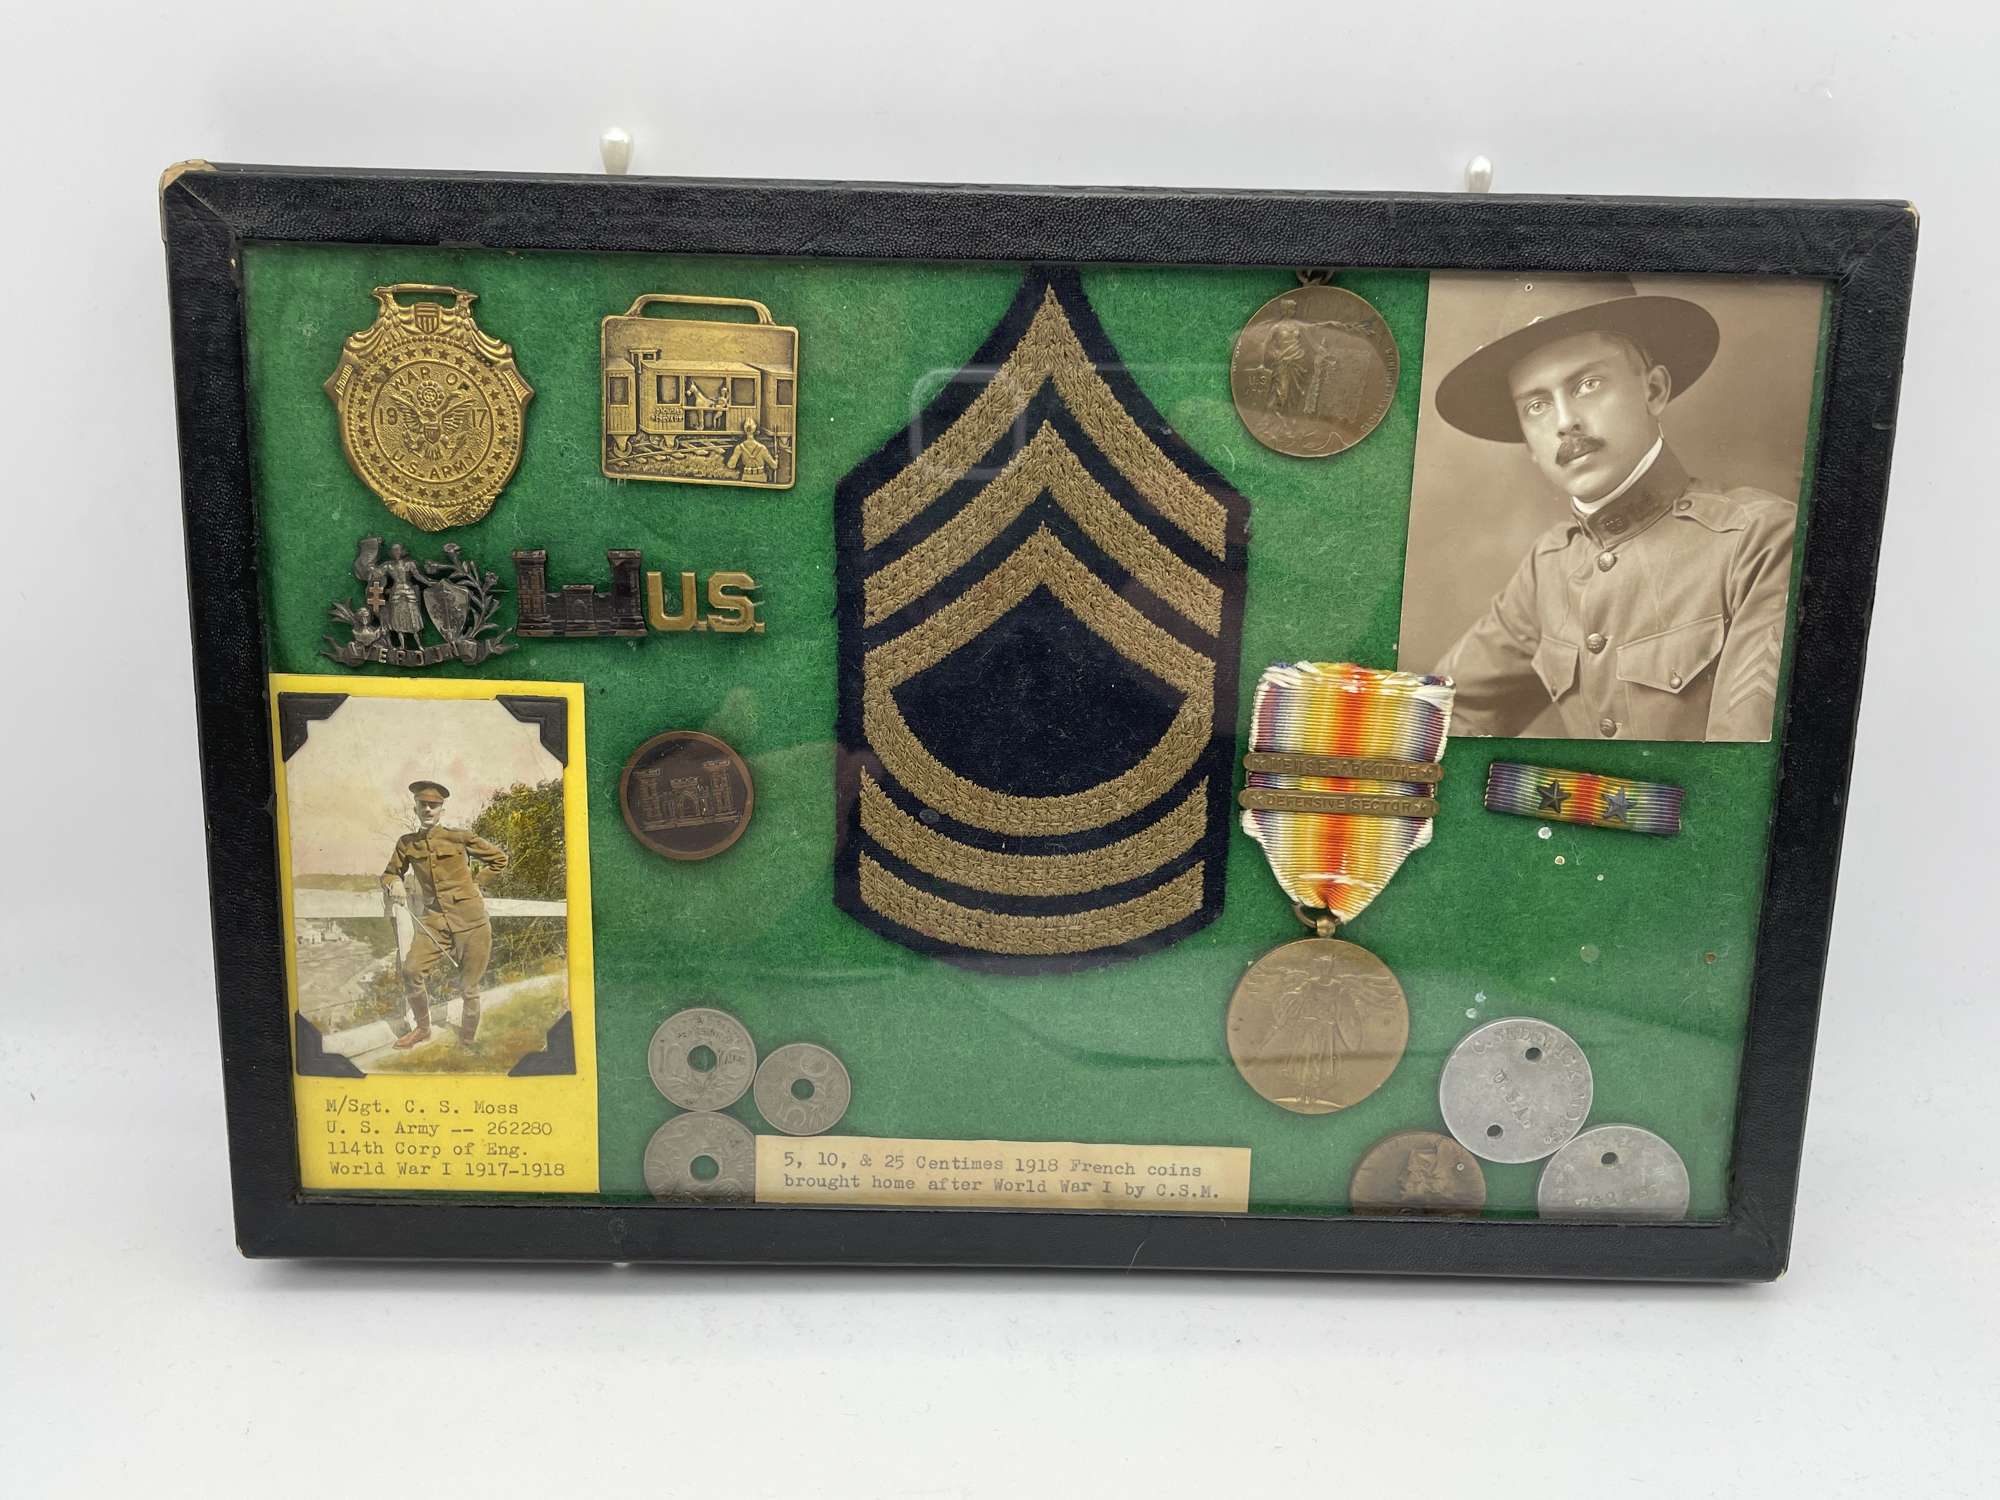 Original World War One American Grouping, Including Victory Medal, 114th Corps of Engineer